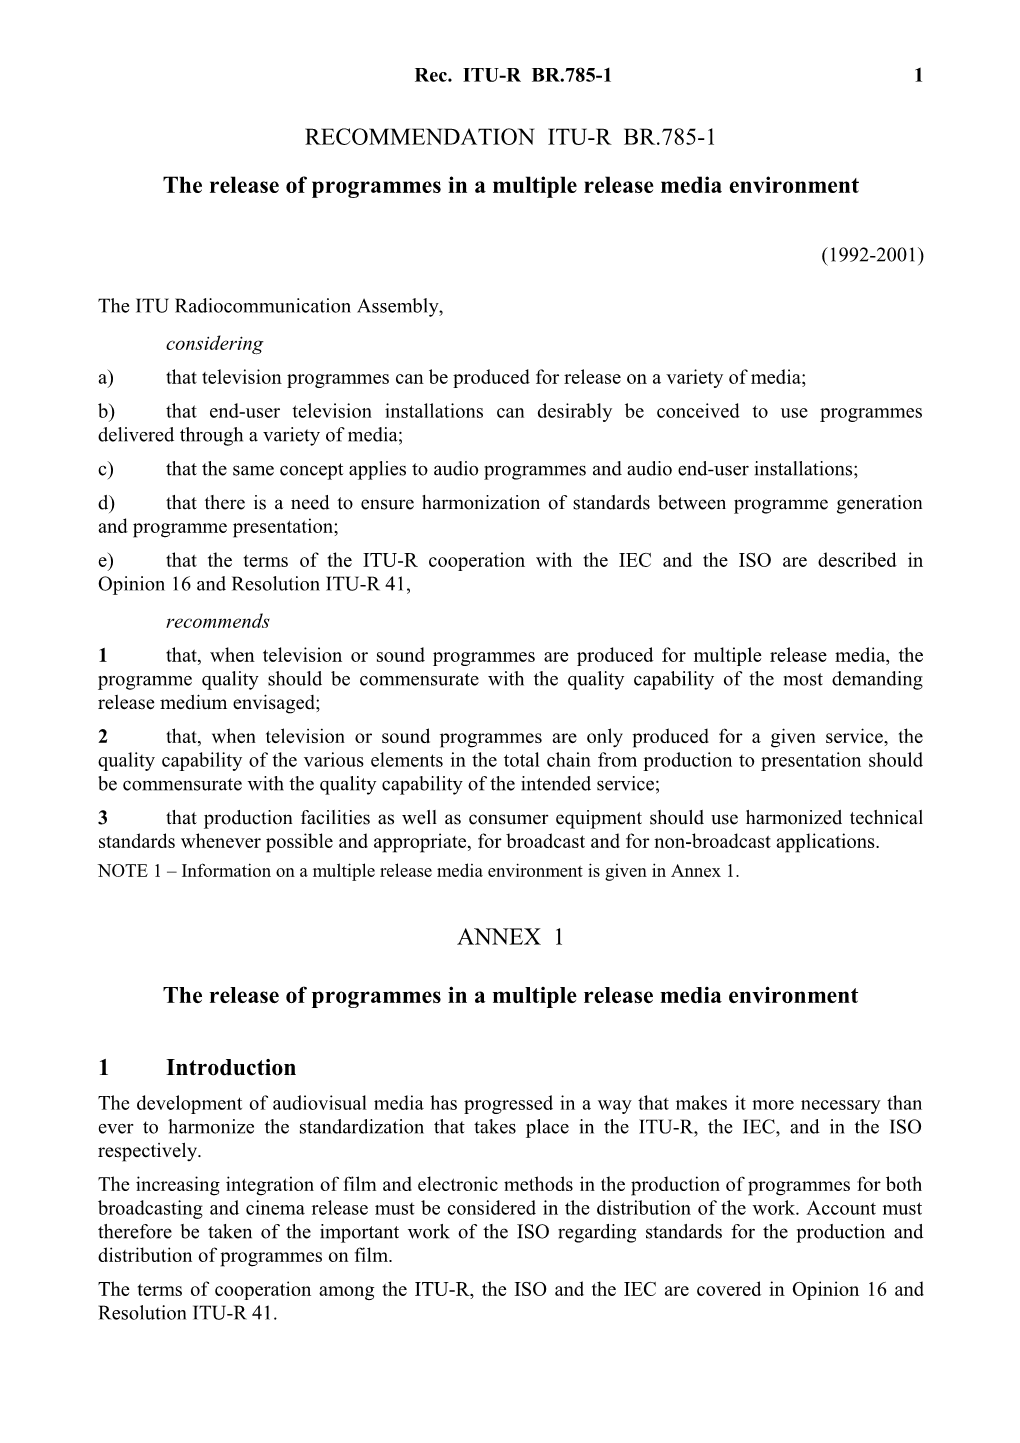 RECOMMENDATION ITU-R BR.785-1 - the Release of Programmes in a Multiple Release Media